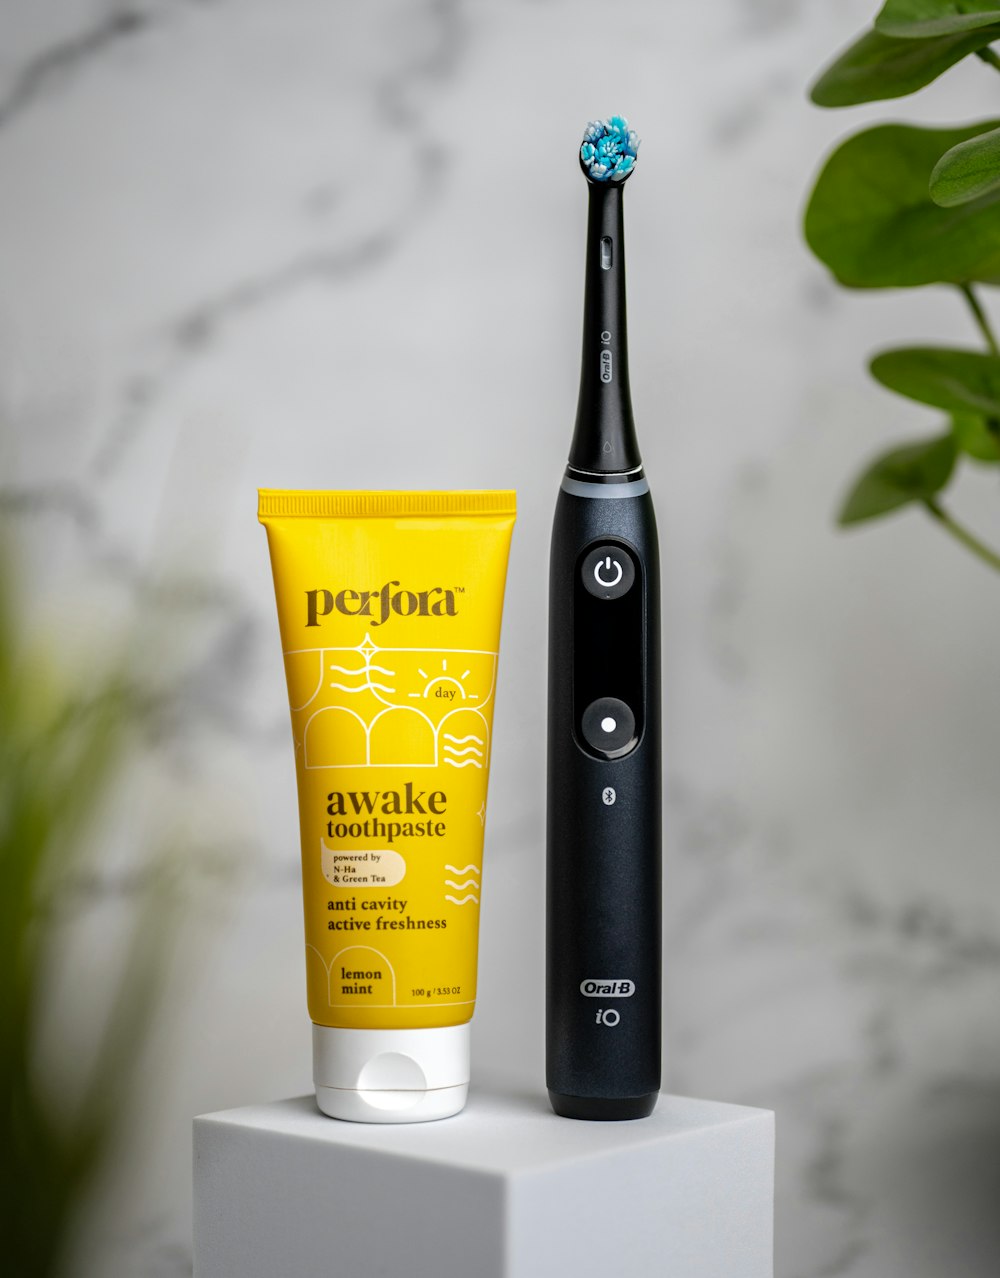 a black electric toothbrush next to a tube of sunscreen and a tube of